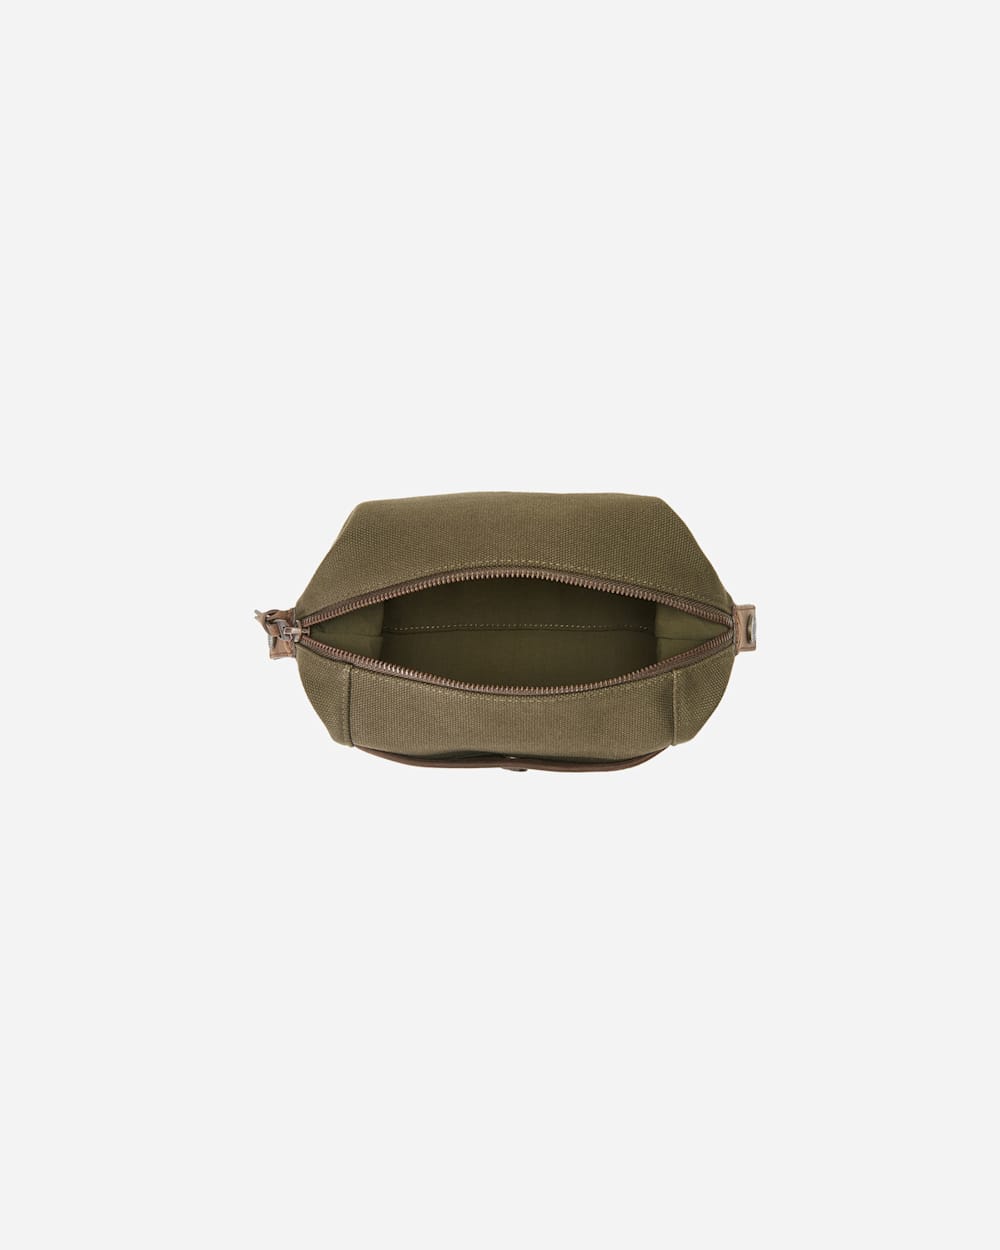 ALTERNATE VIEW OF BRIDGER STRIPE TRAVEL POUCH IN BROWN image number 3